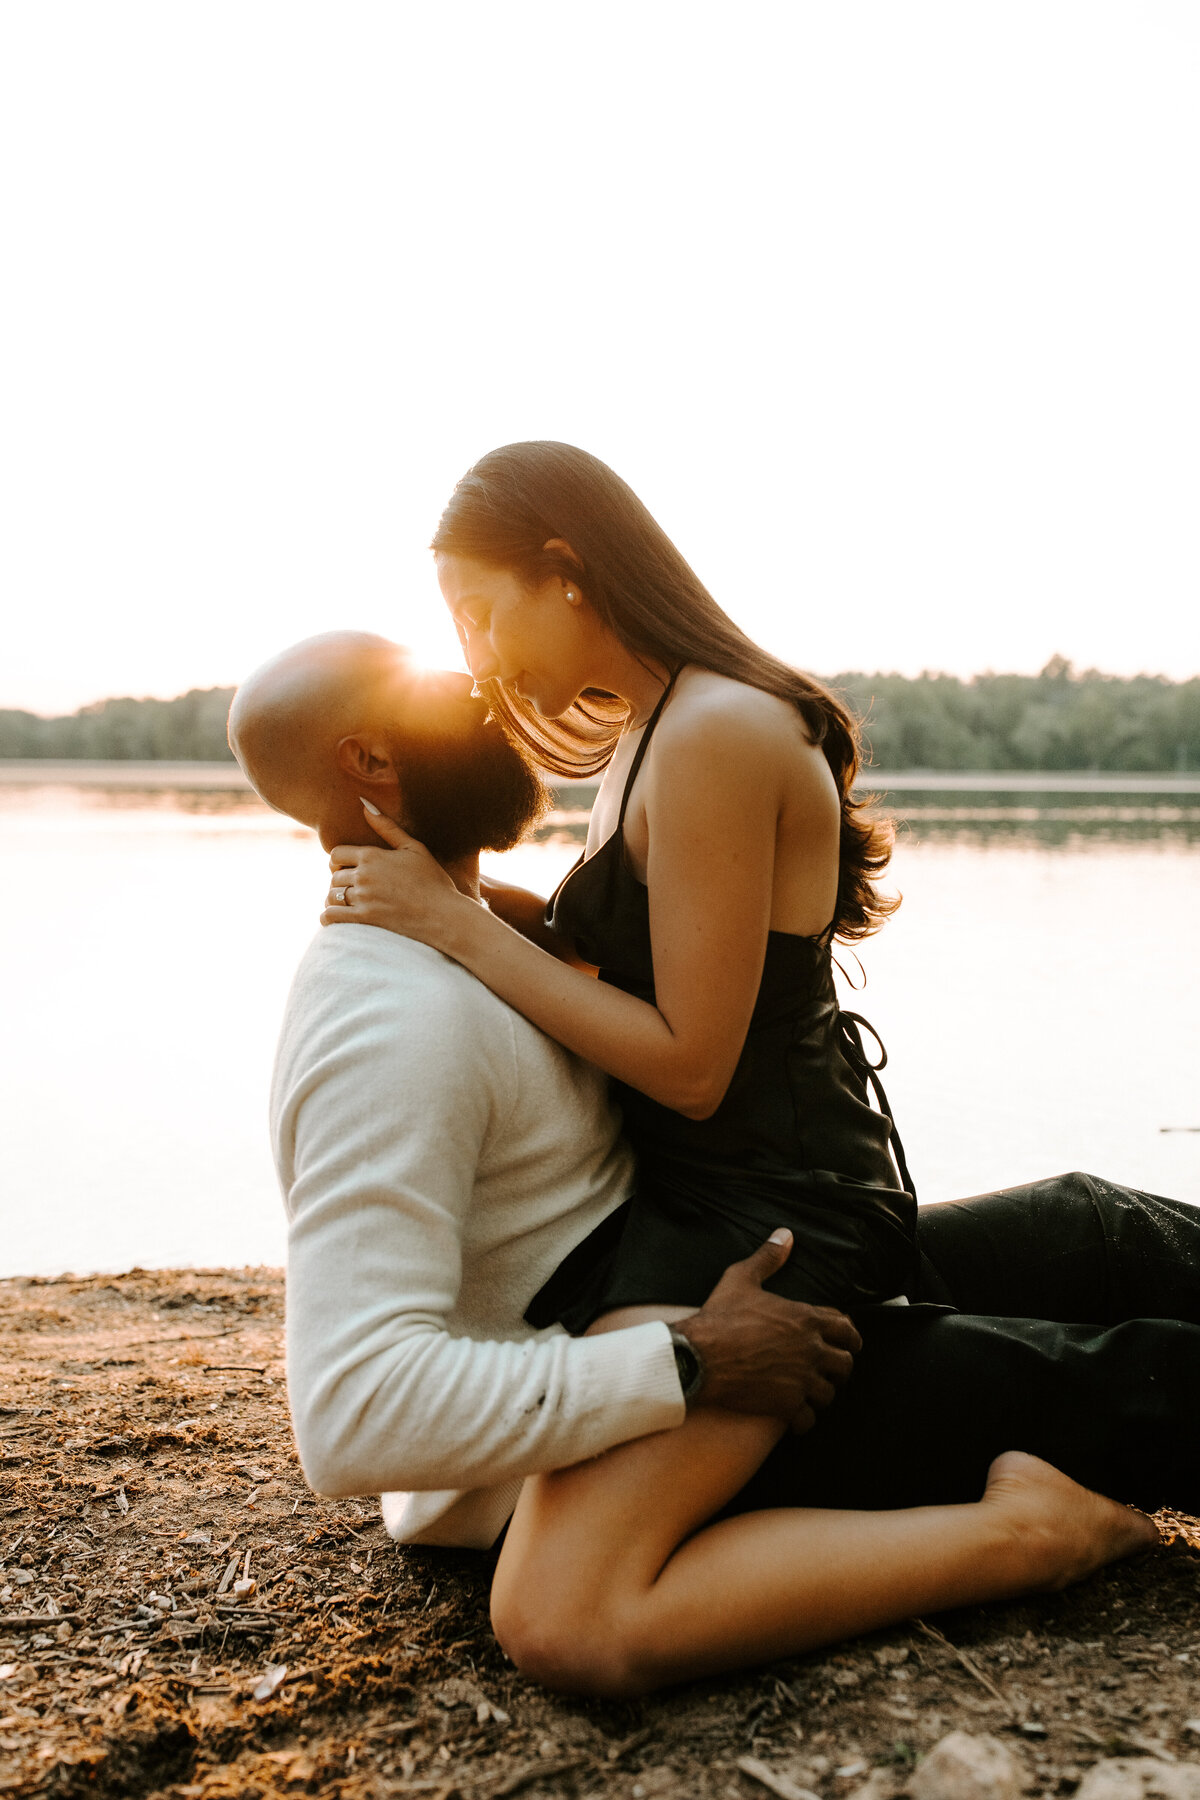 A male and female couple, the man is sitting on the ground while the woman straddles him. They are nose to nose as the sun sets right in between their faces.